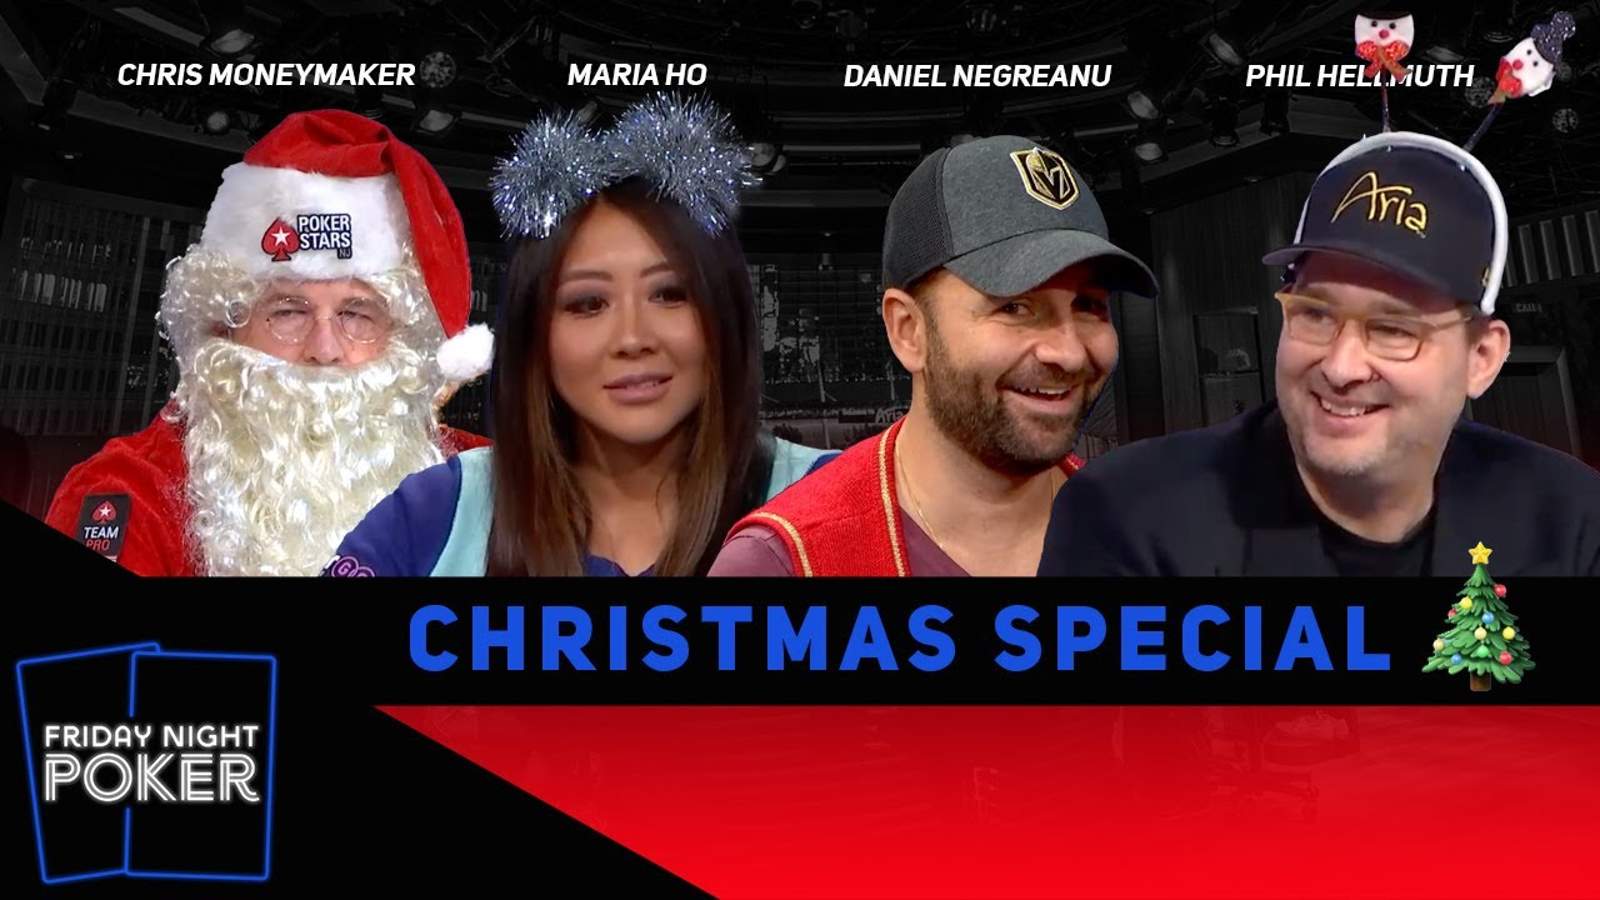 Rewatch Friday Night Poker Christmas Special on YouTube and Facebook